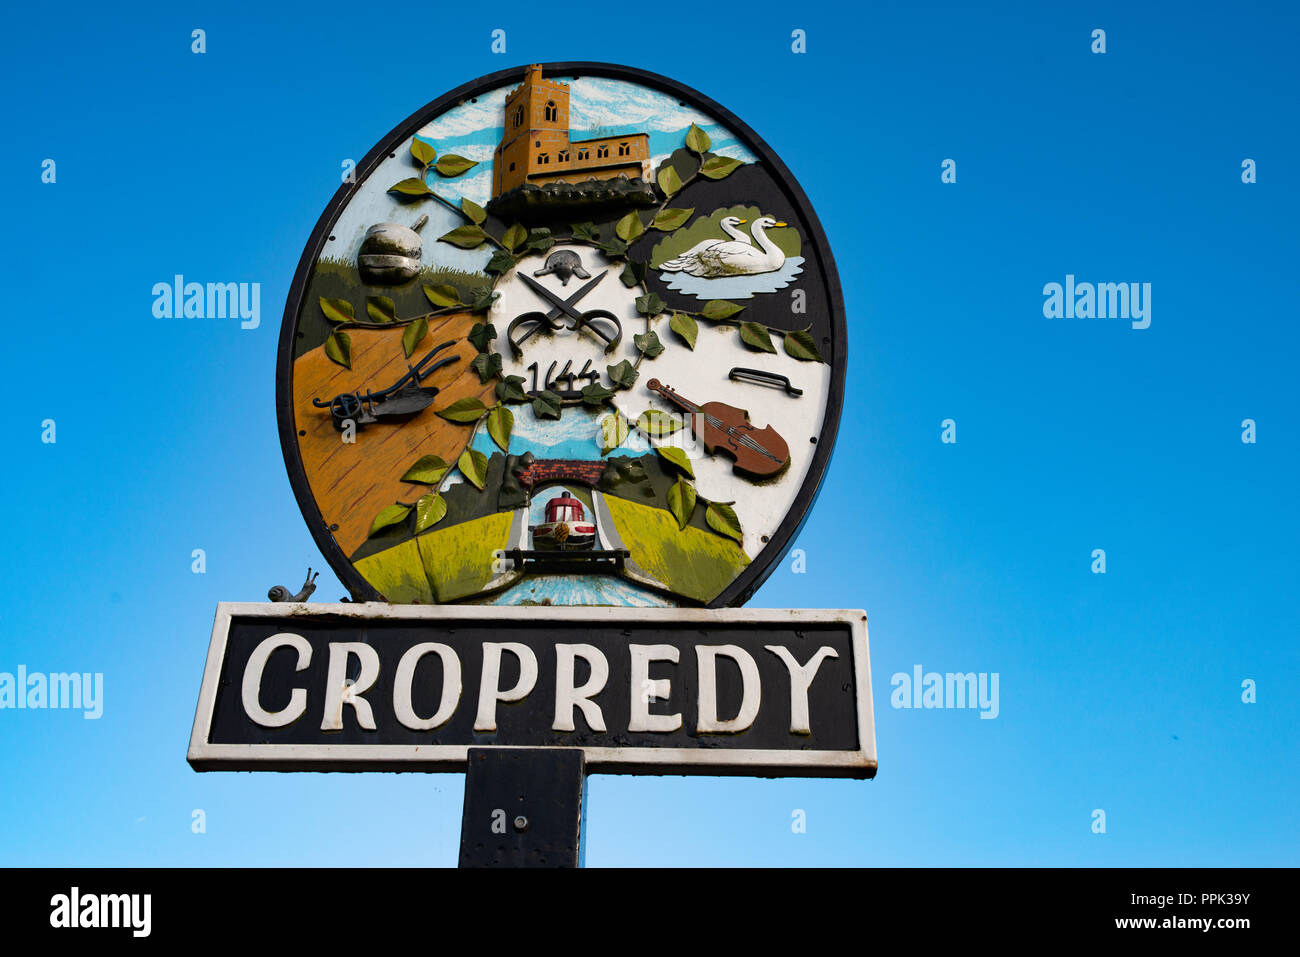 Traditional village brightly colourful round metal sign for Cropredy against a clear blue sky. Stock Photo